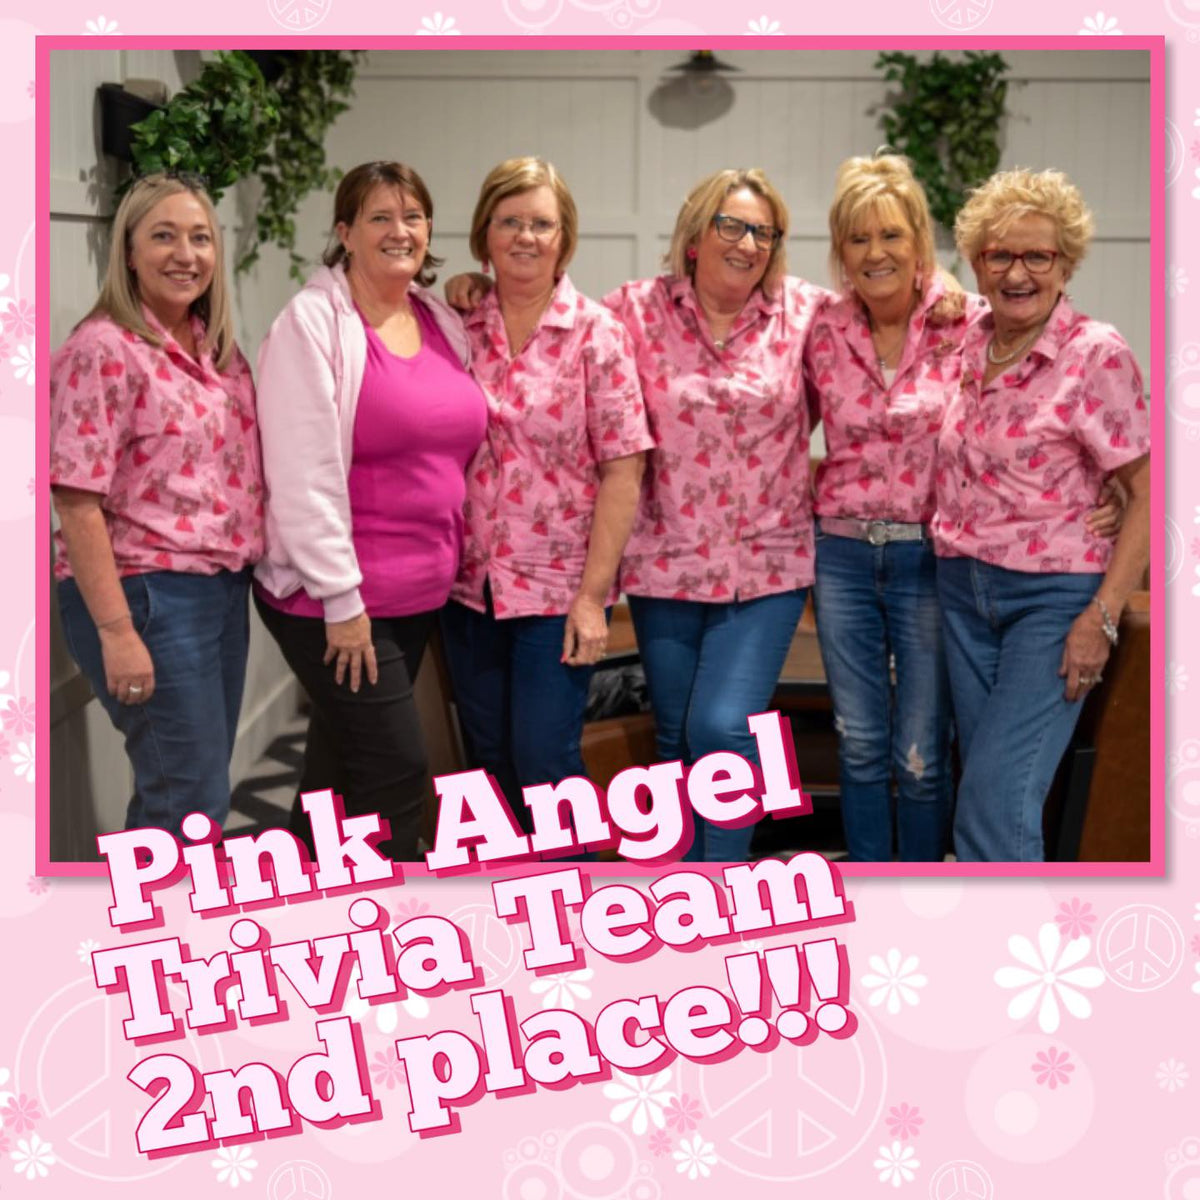 The amazing Pink Ladies Inc. in Dubbo are a registered Breast Cancer Charity. They wanted some new Custom Hawaiian Shirt Uniforms. The ladies supplied us with a very cute angel graphic and of course wanted the shirt to be pink. What champs. We think the shirts came out well and they look amazing.